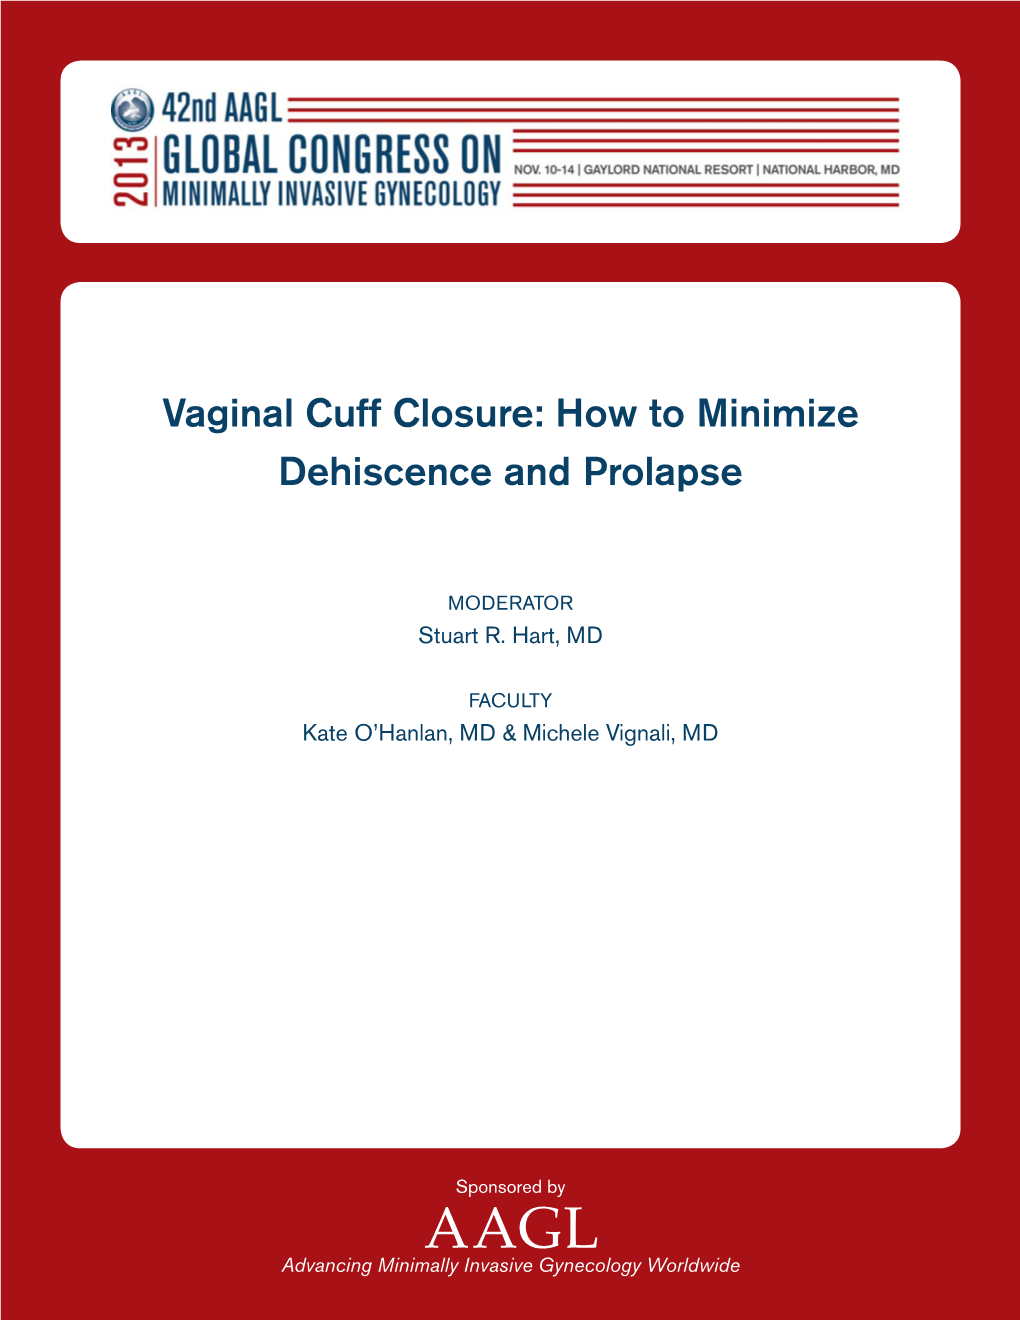 Vaginal Cuff Closure: How to Minimize Dehiscence and Prolapse